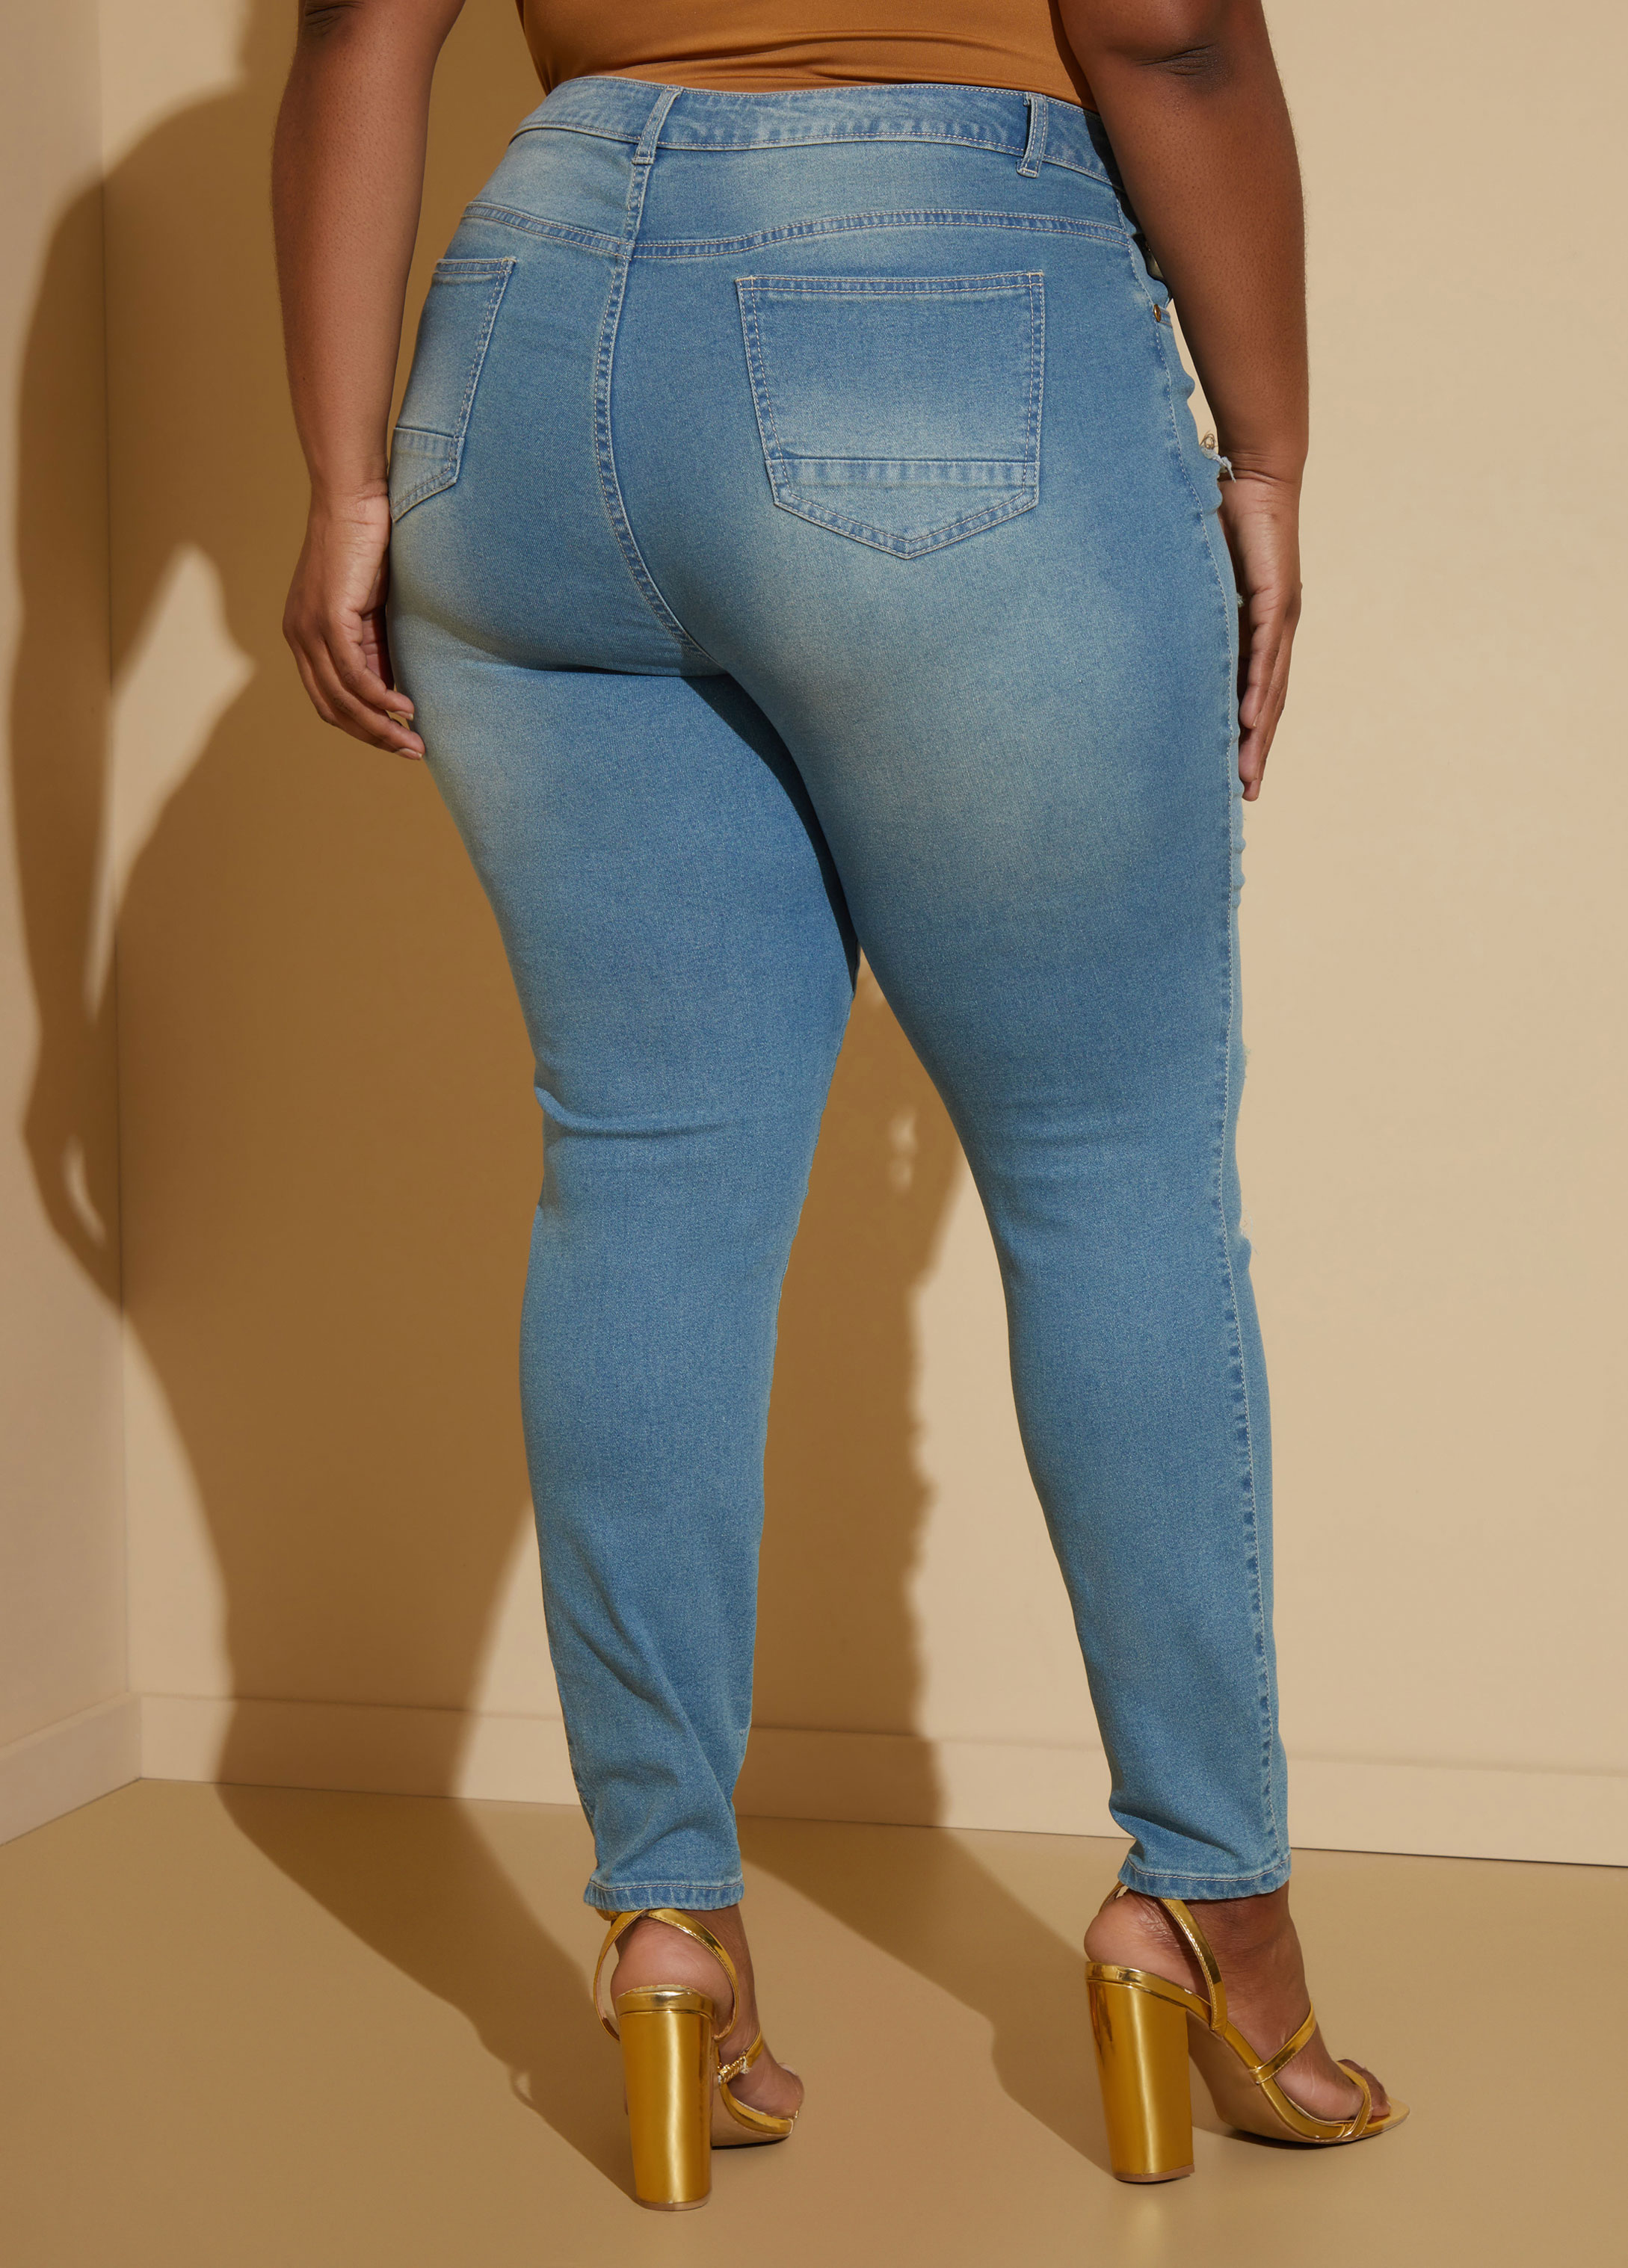 Plus Size Sequined Skinny Jeans, Blue, 3X - Ashley Stewart